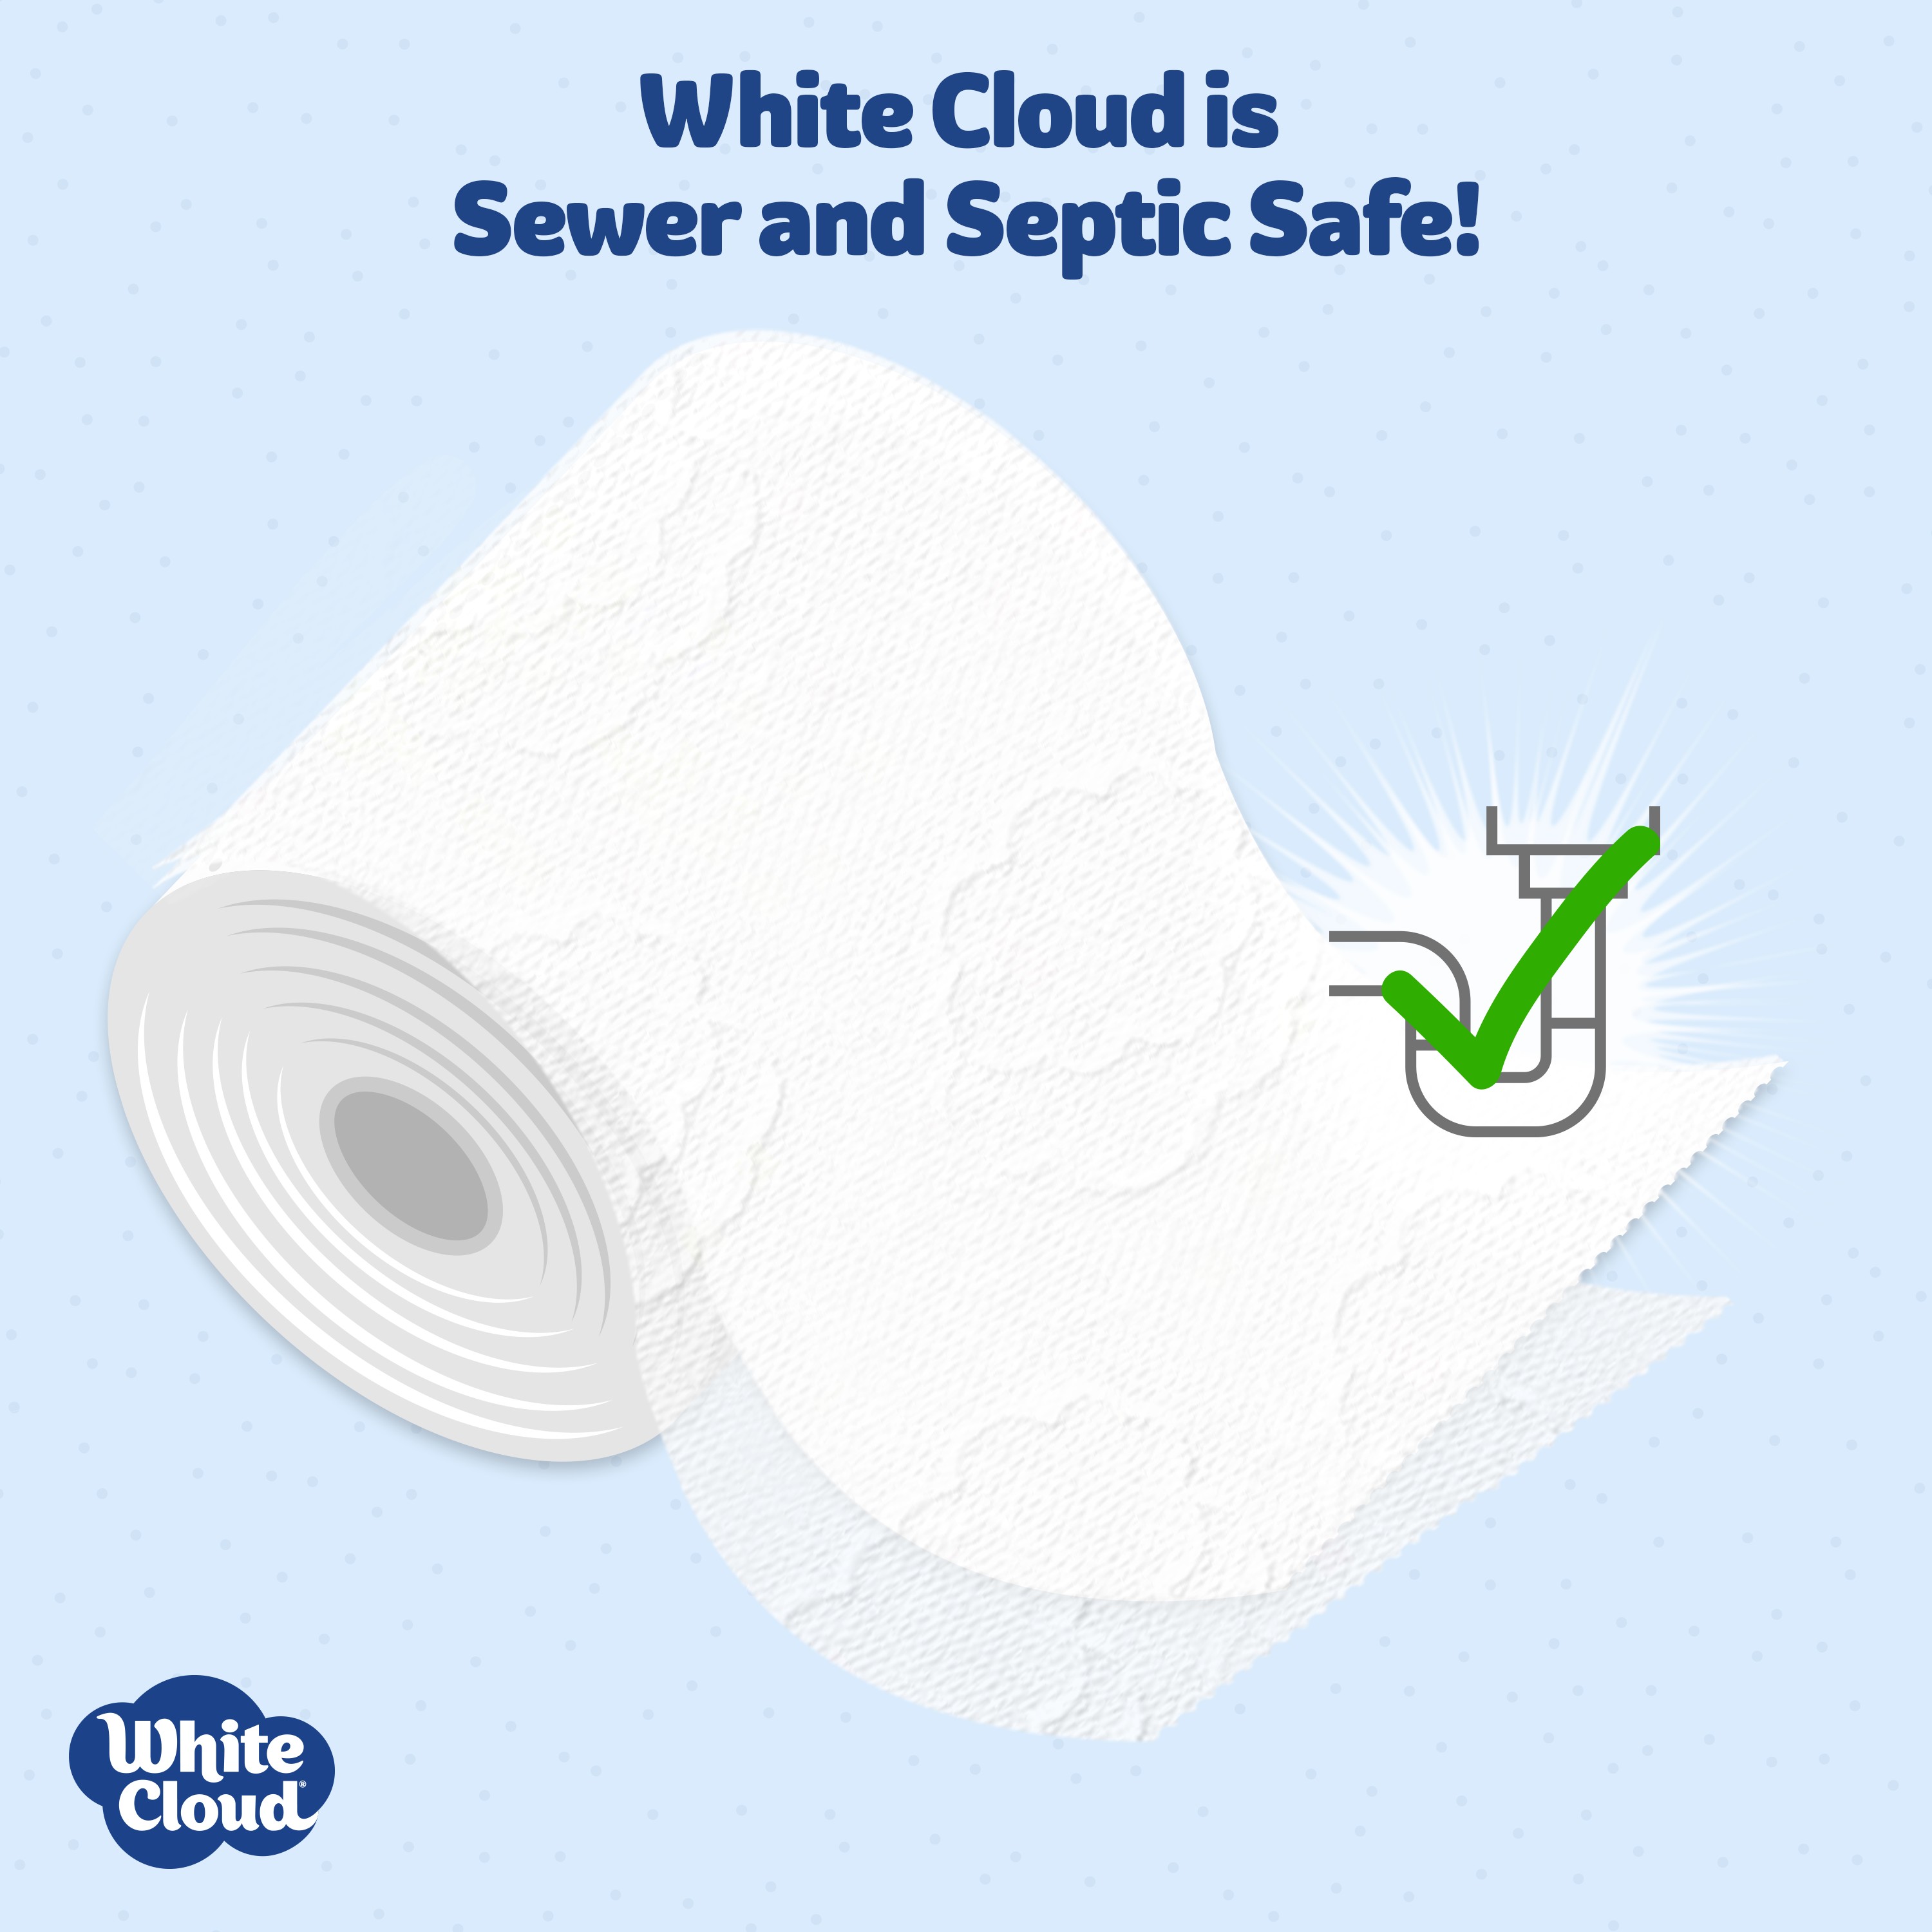 White Cloud Ultra Strong & Soft Toilet Paper, 12 Mega Rolls - image 3 of 6